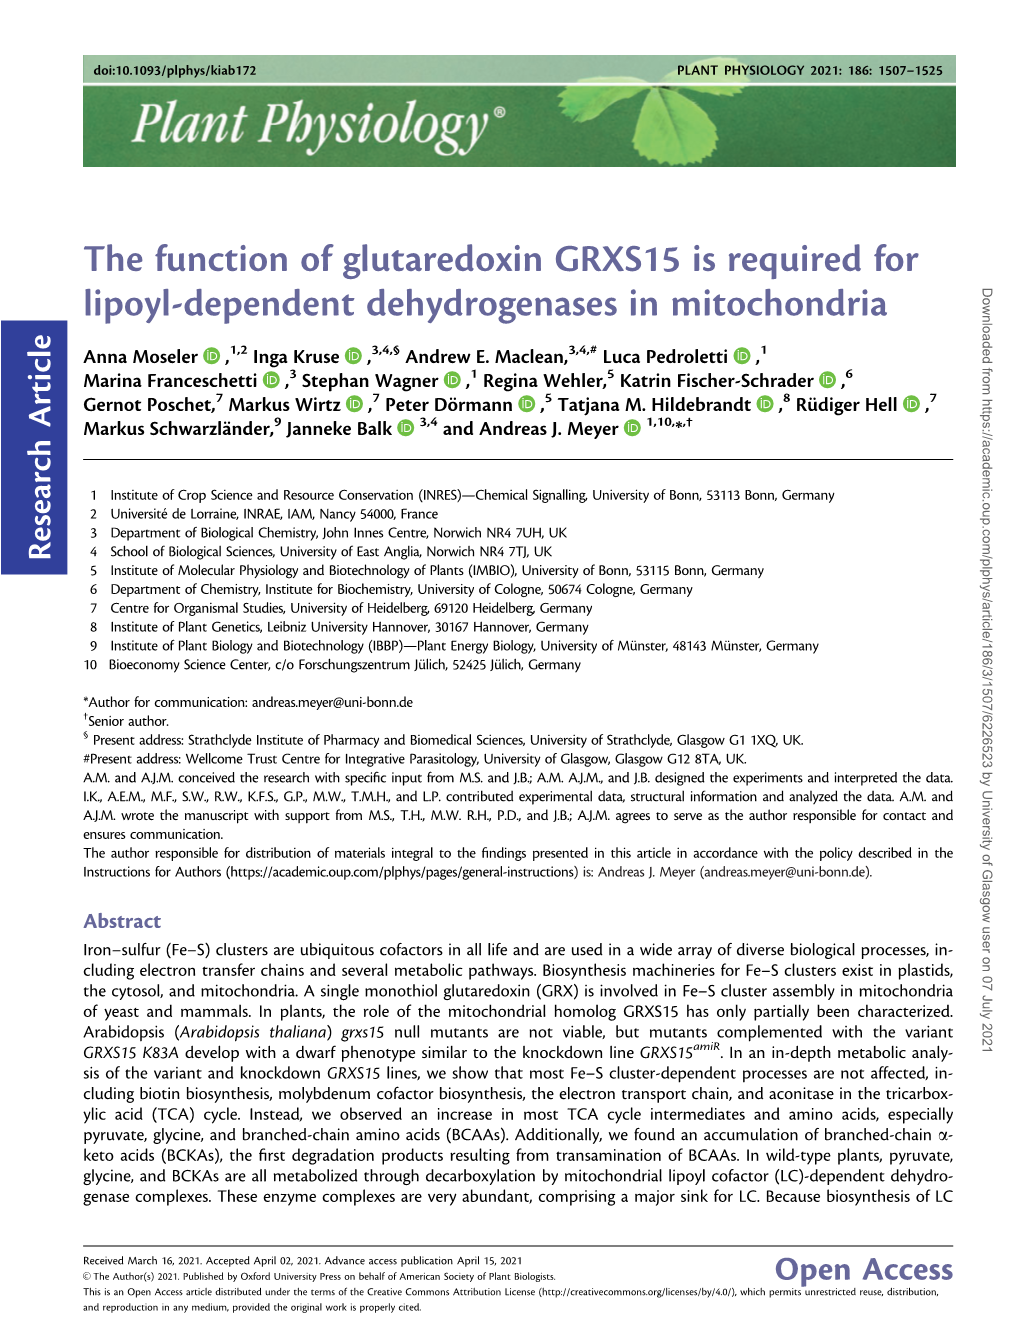 The Function of Glutaredoxin GRXS15 Is Required for Lipoyl-Dependent